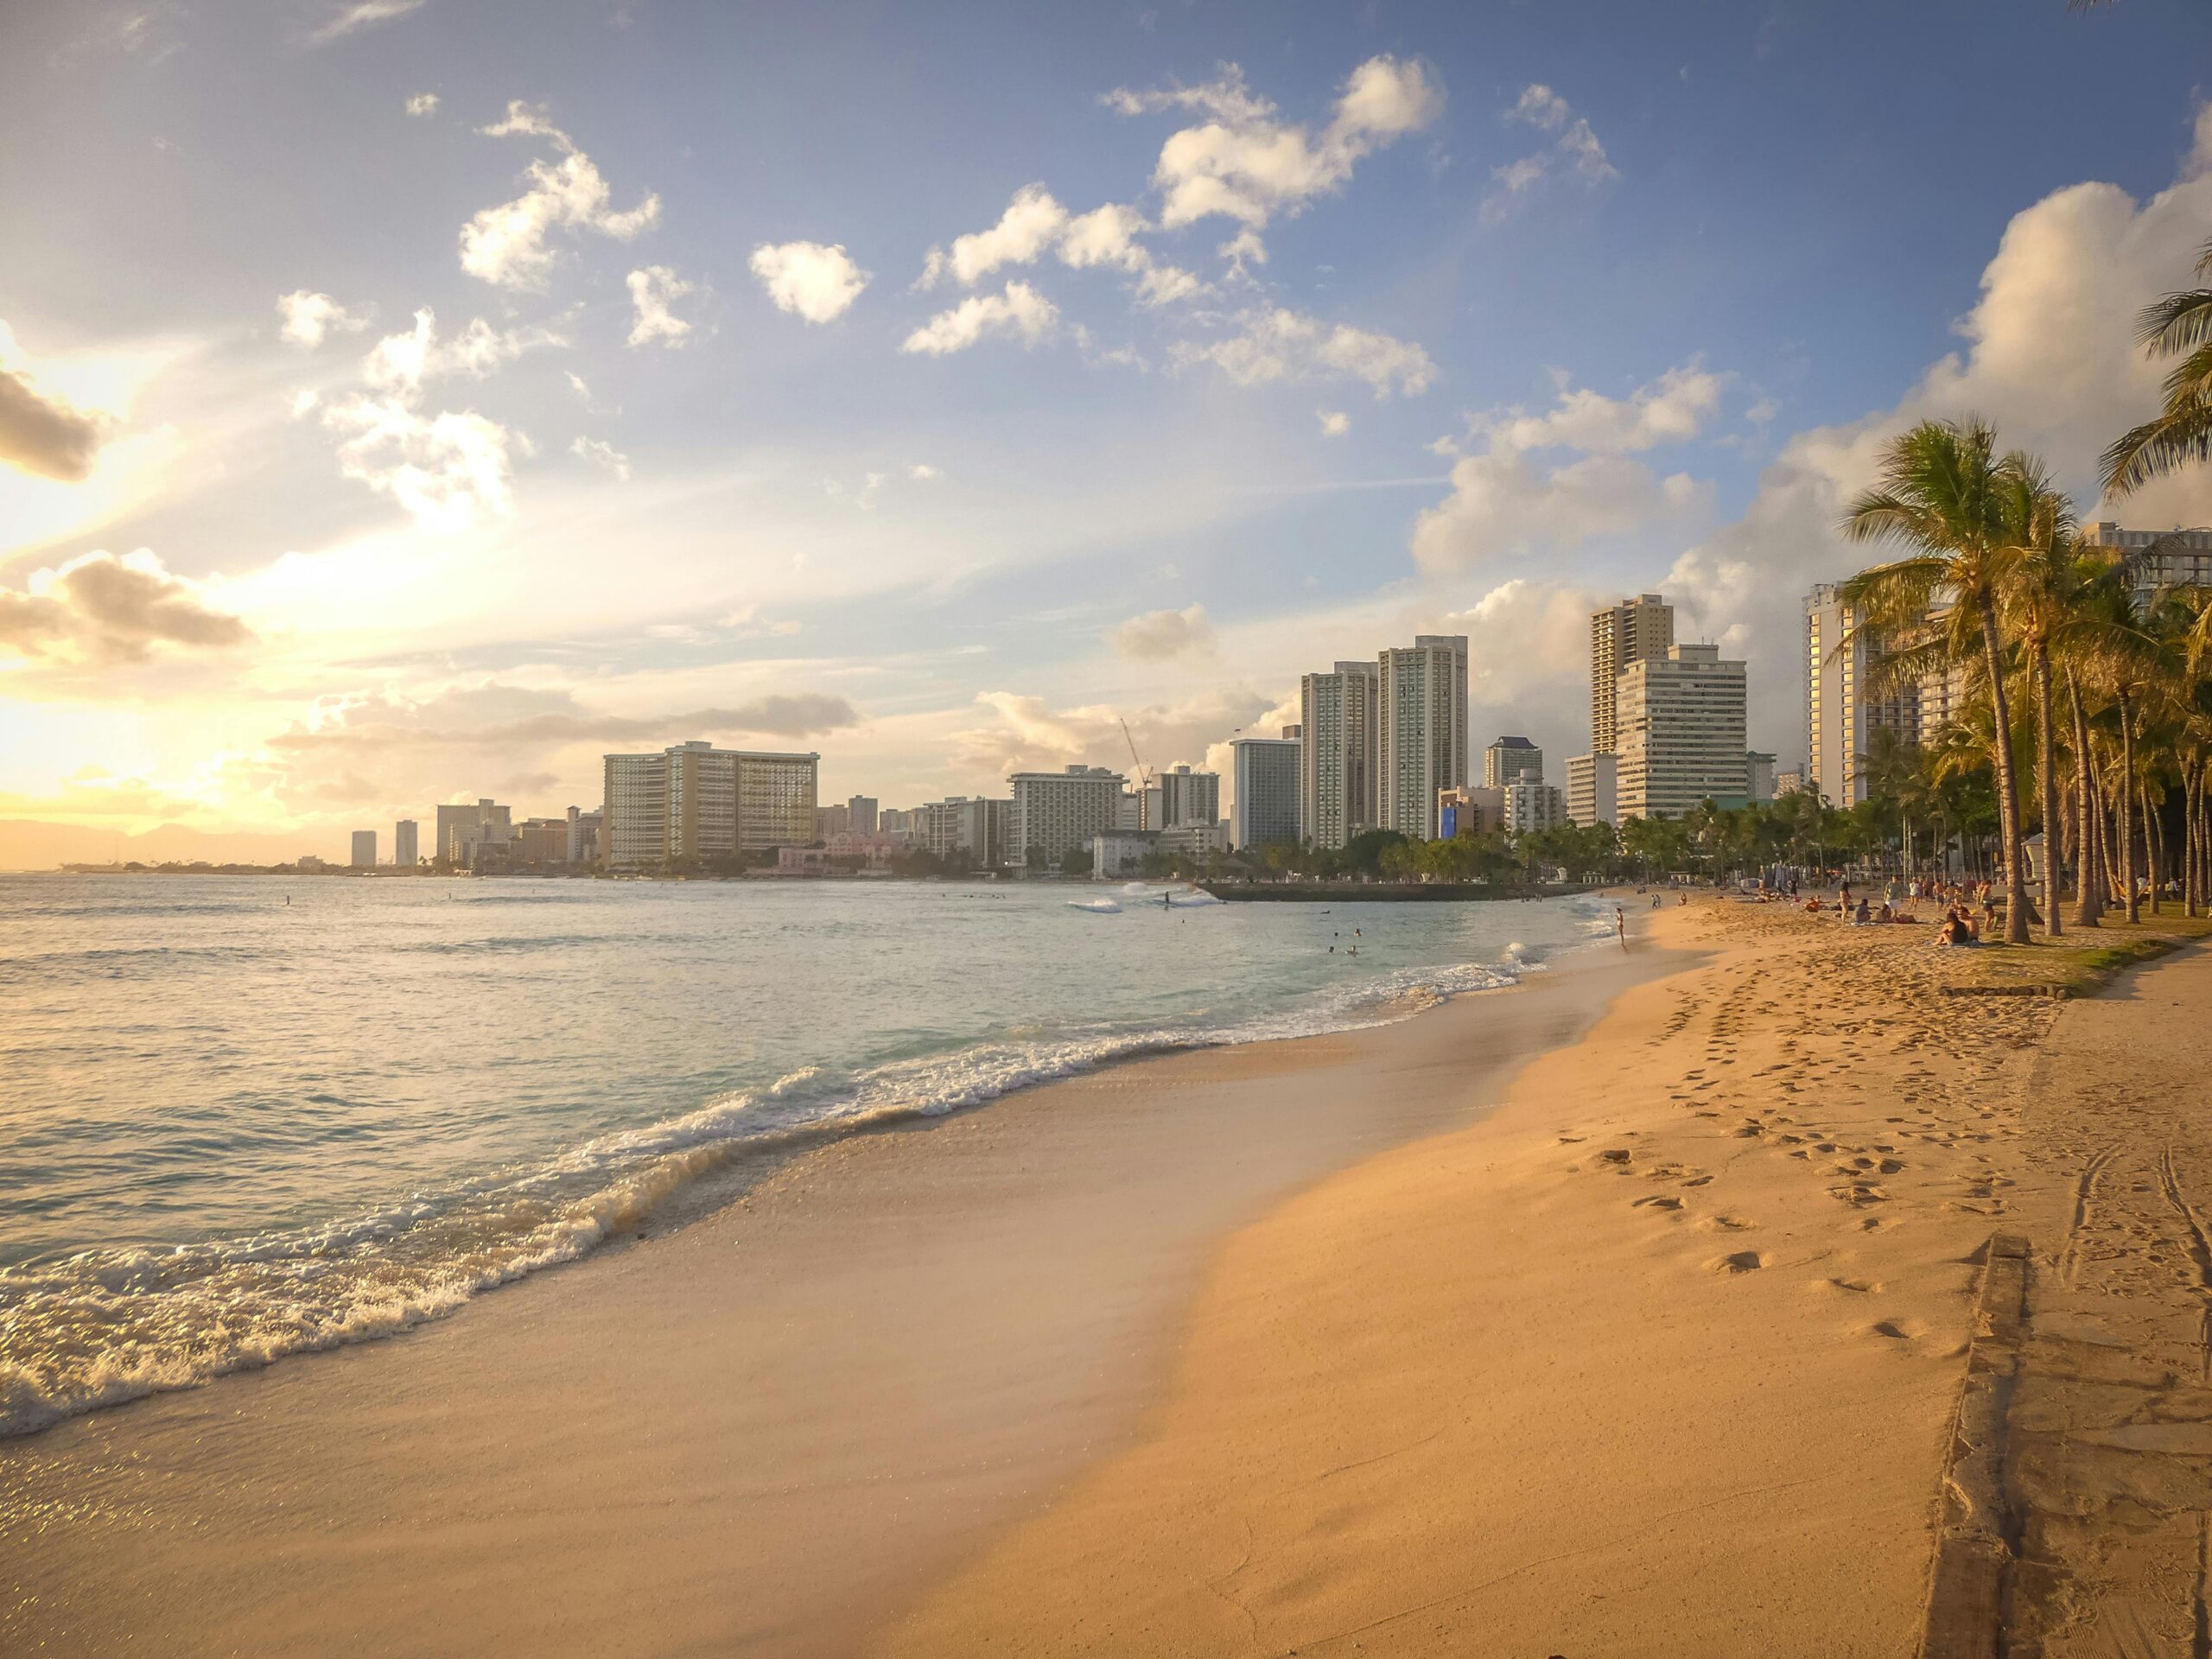 Image of beach with Honolulu in the background.